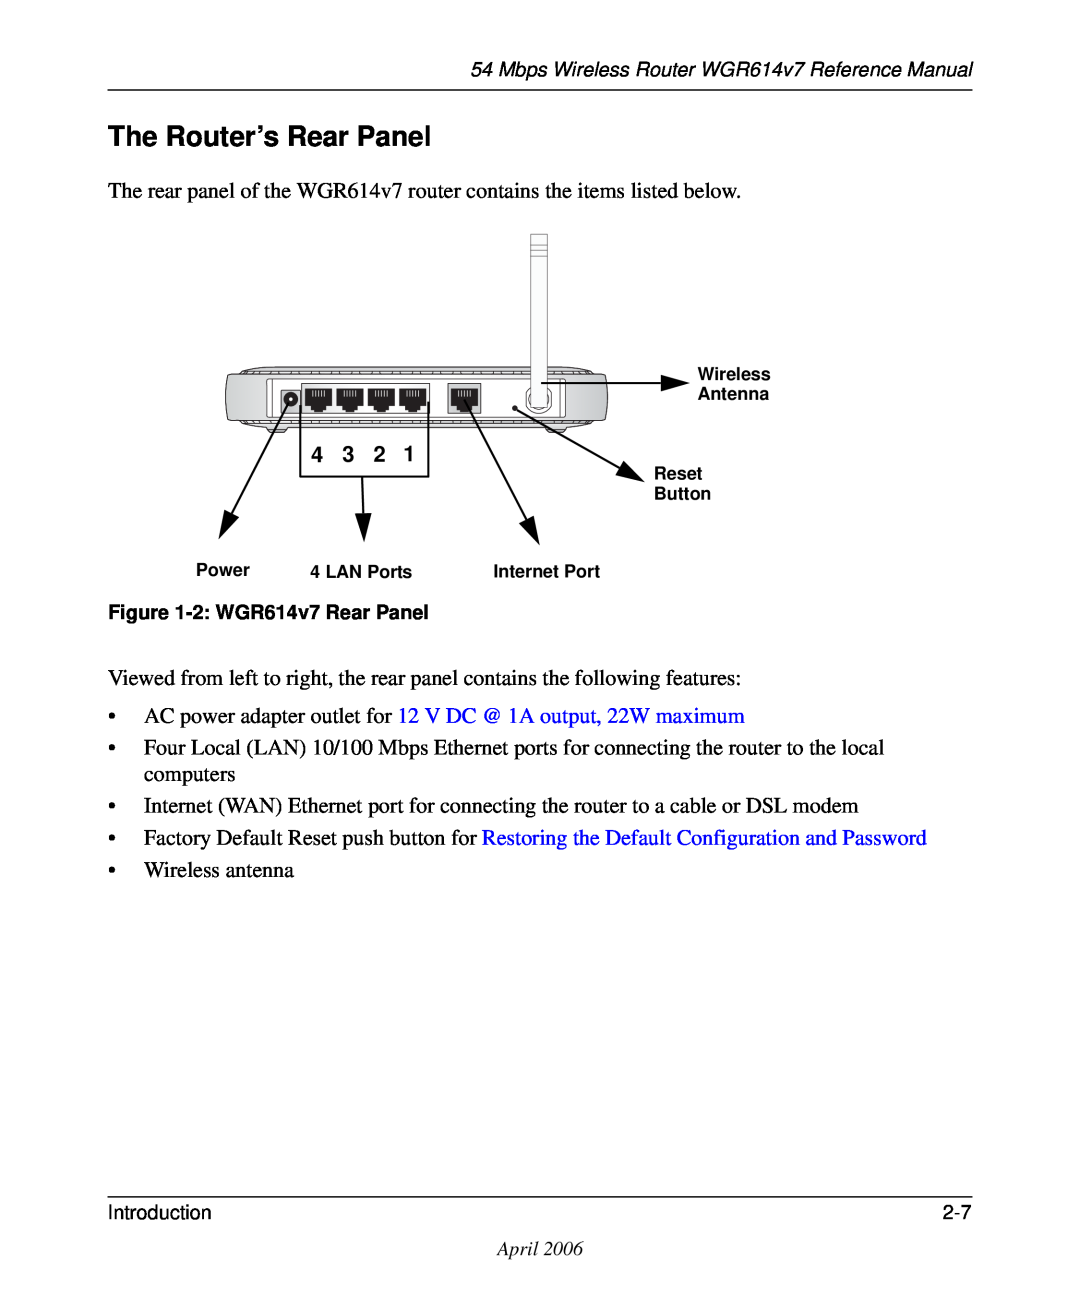 NETGEAR WGR614v7 manual The Router’s Rear Panel, 4 3 2, AC power adapter outlet for 12 V DC @ 1A output, 22W maximum 